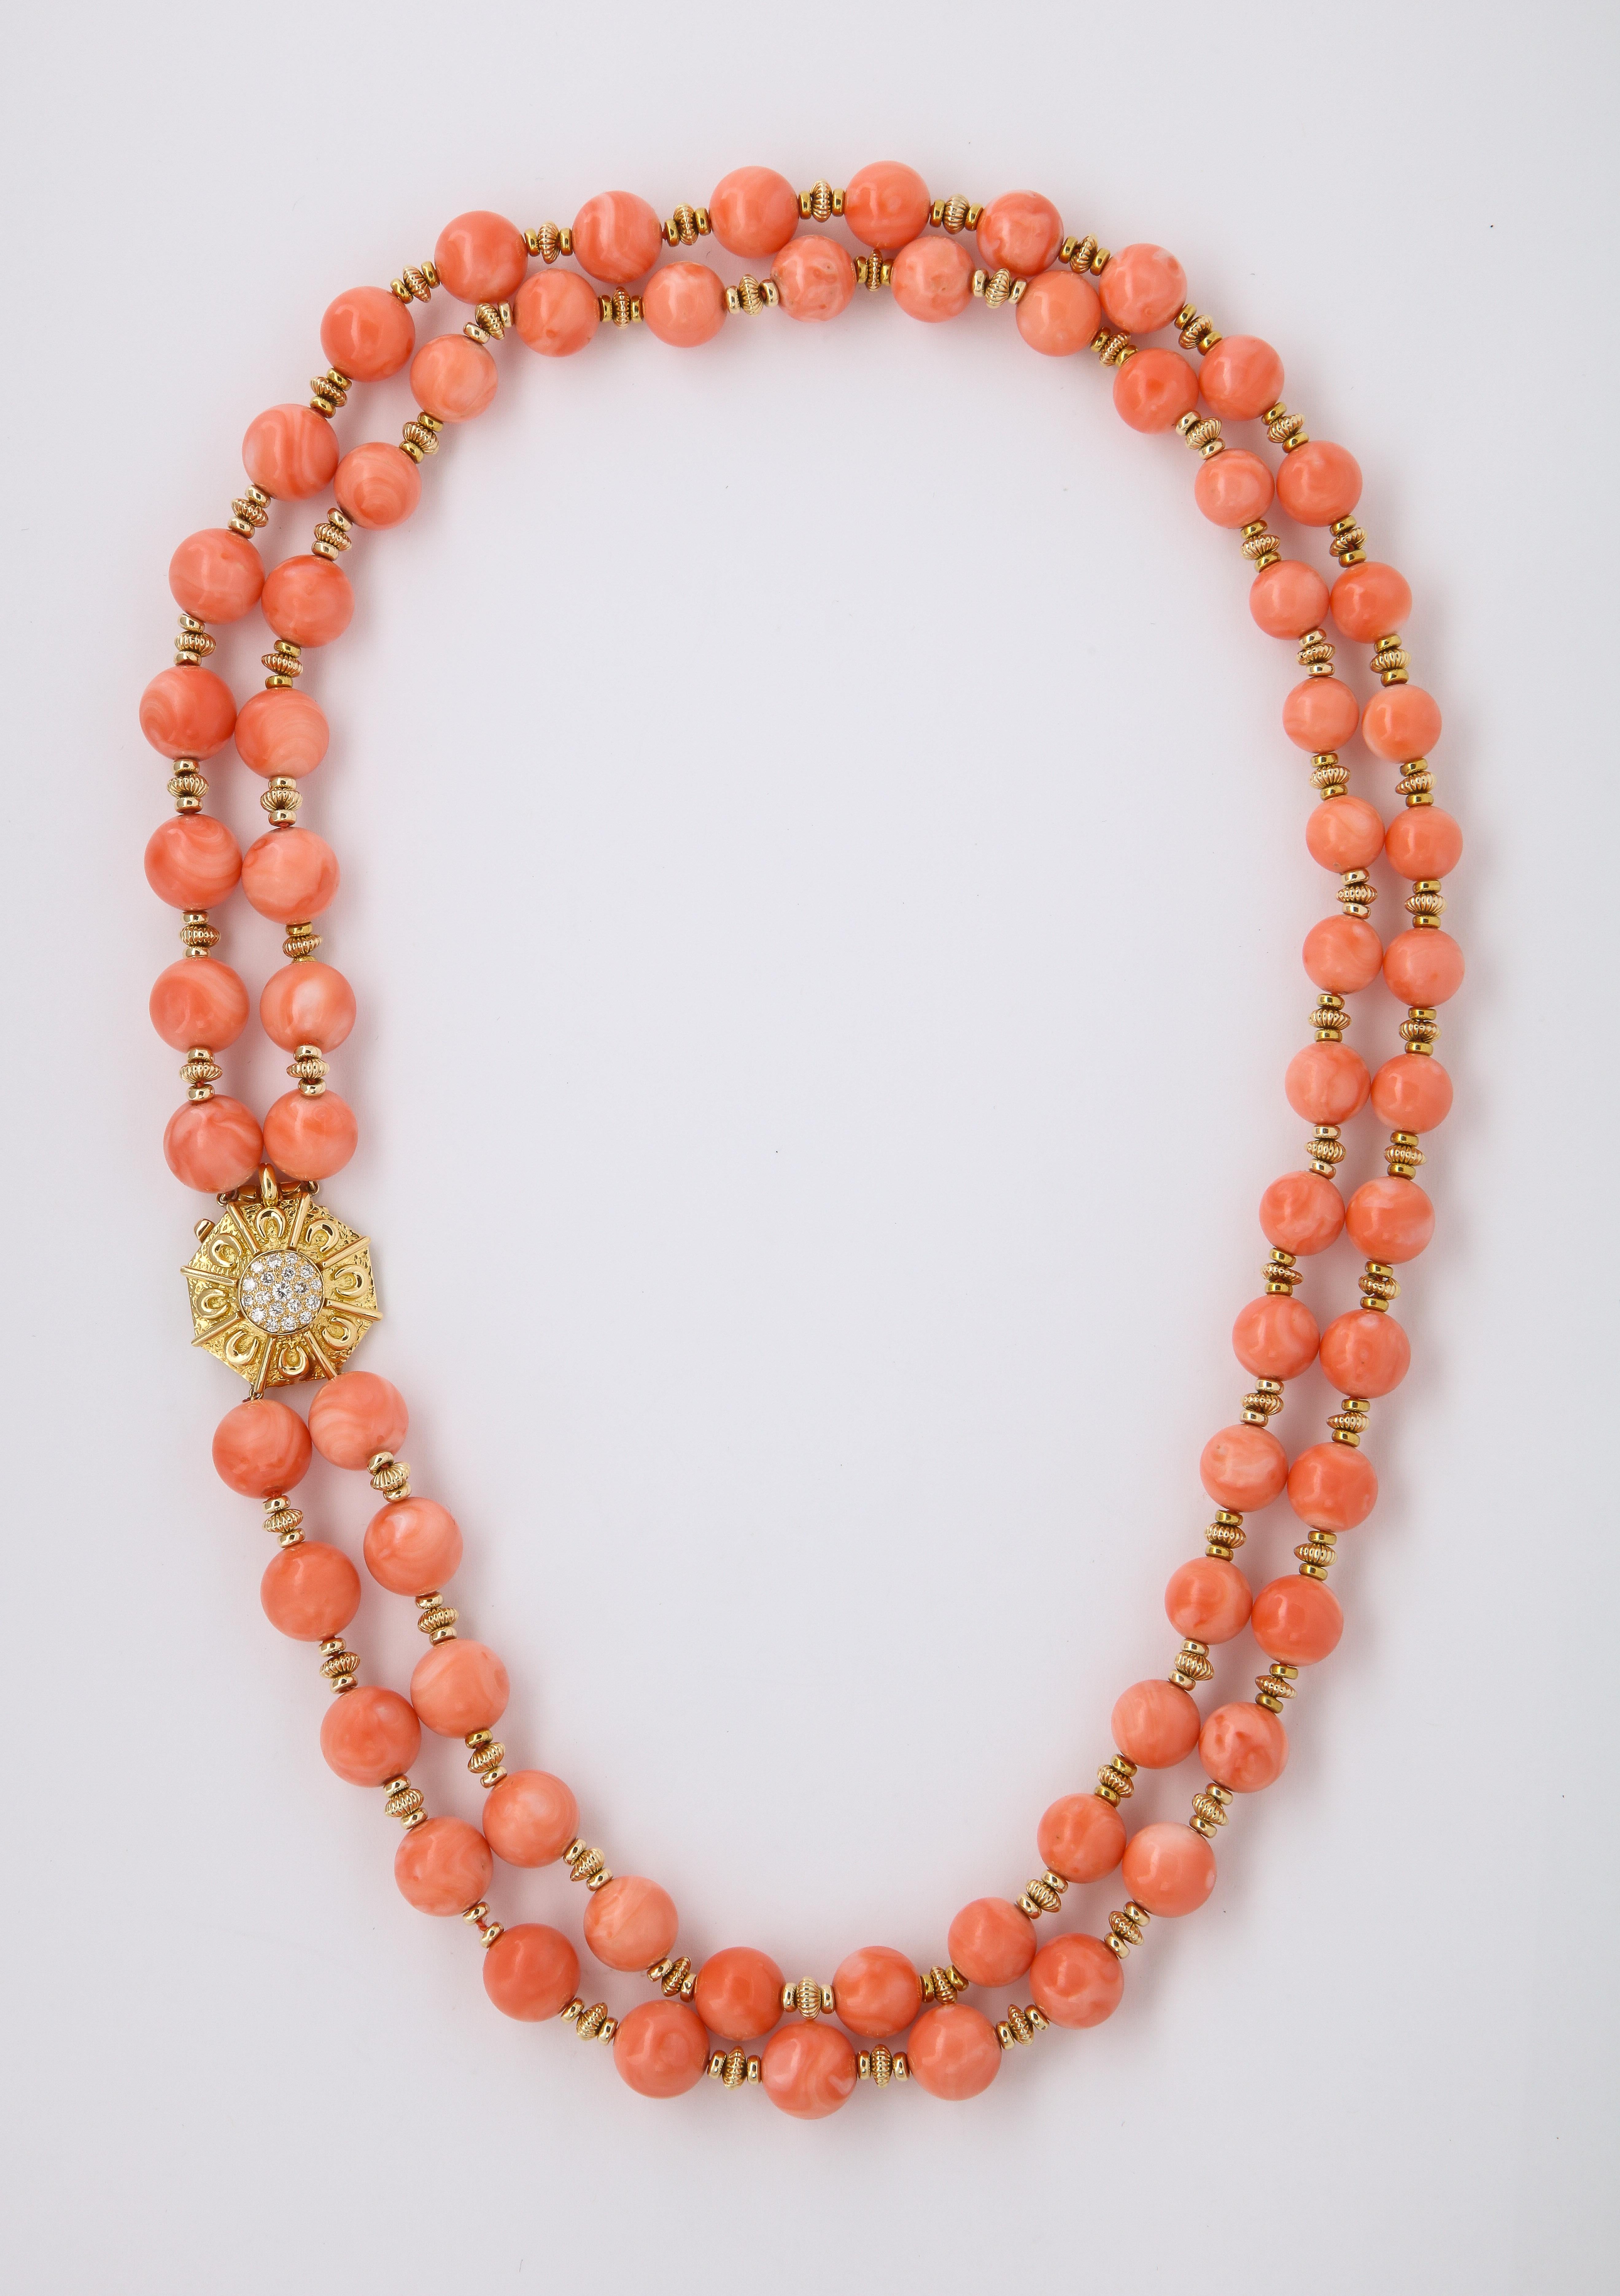 Van Cleef & Arpels Coral Bead Necklace, double strands of beads with 18K Yellow Gold spacers  & diamonds set at the clasp
68  beads  approx 8.80 mm to 11.50 mm
19 round cut diamonds
Diamond Weight: approx 0.40 - 0.50 Cts 
Signed VCA , Marked made in